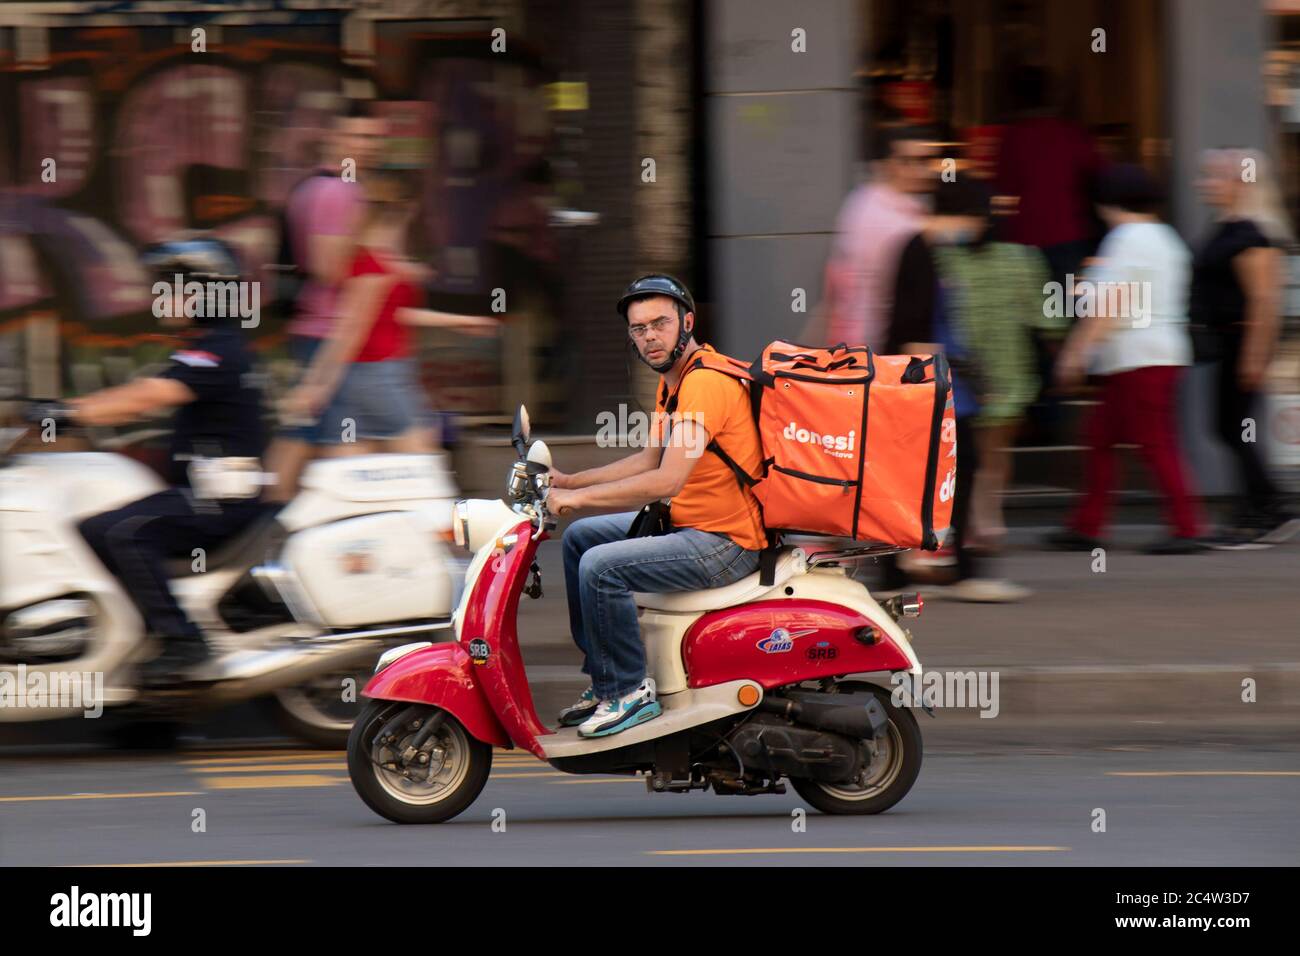 Belgrade, Serbia - June 25, 2020 : Delivery service courier riding a two tone red beige vintage vespa scooter in the city street traffic,  panning Stock Photo